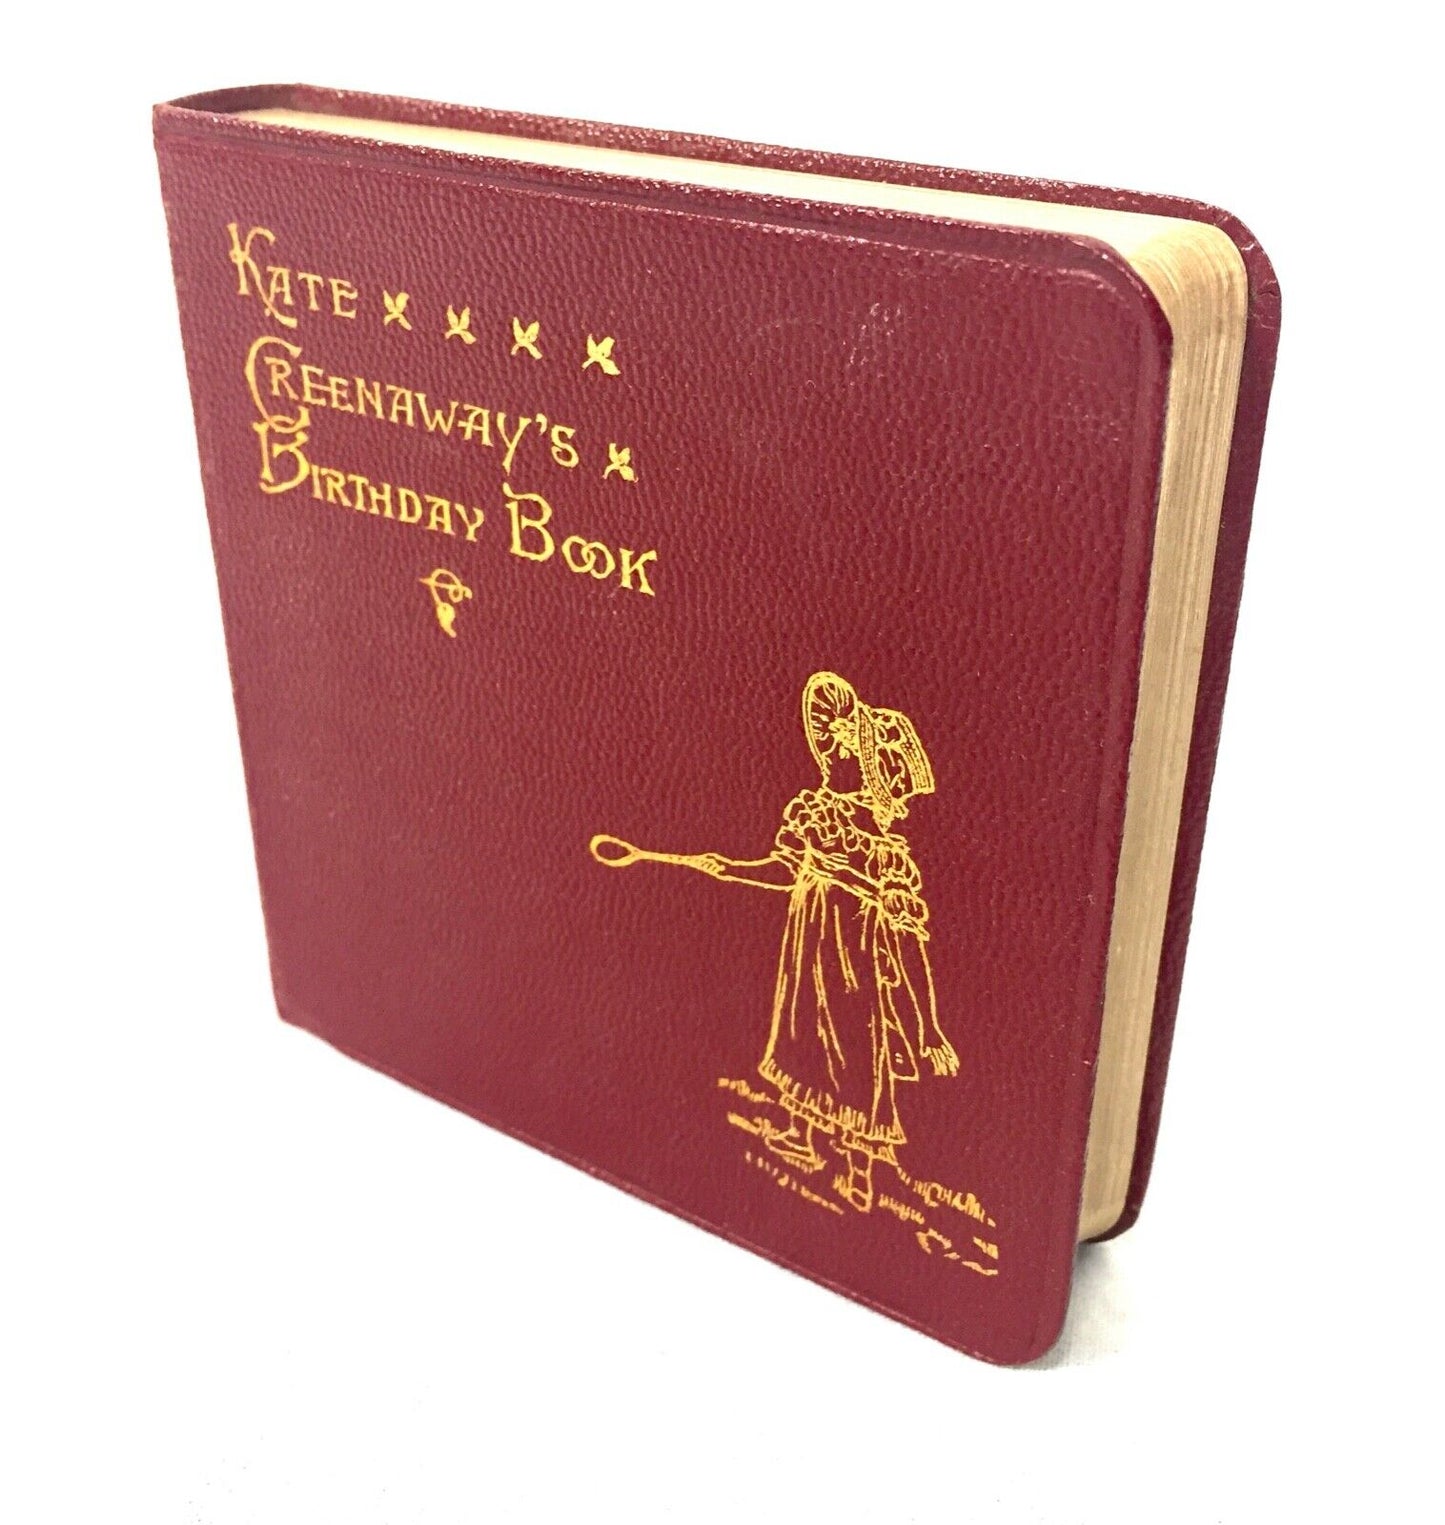 Antique Kate Greenway's Birthday Book Diary / Notebook by Frederick Warne & Co